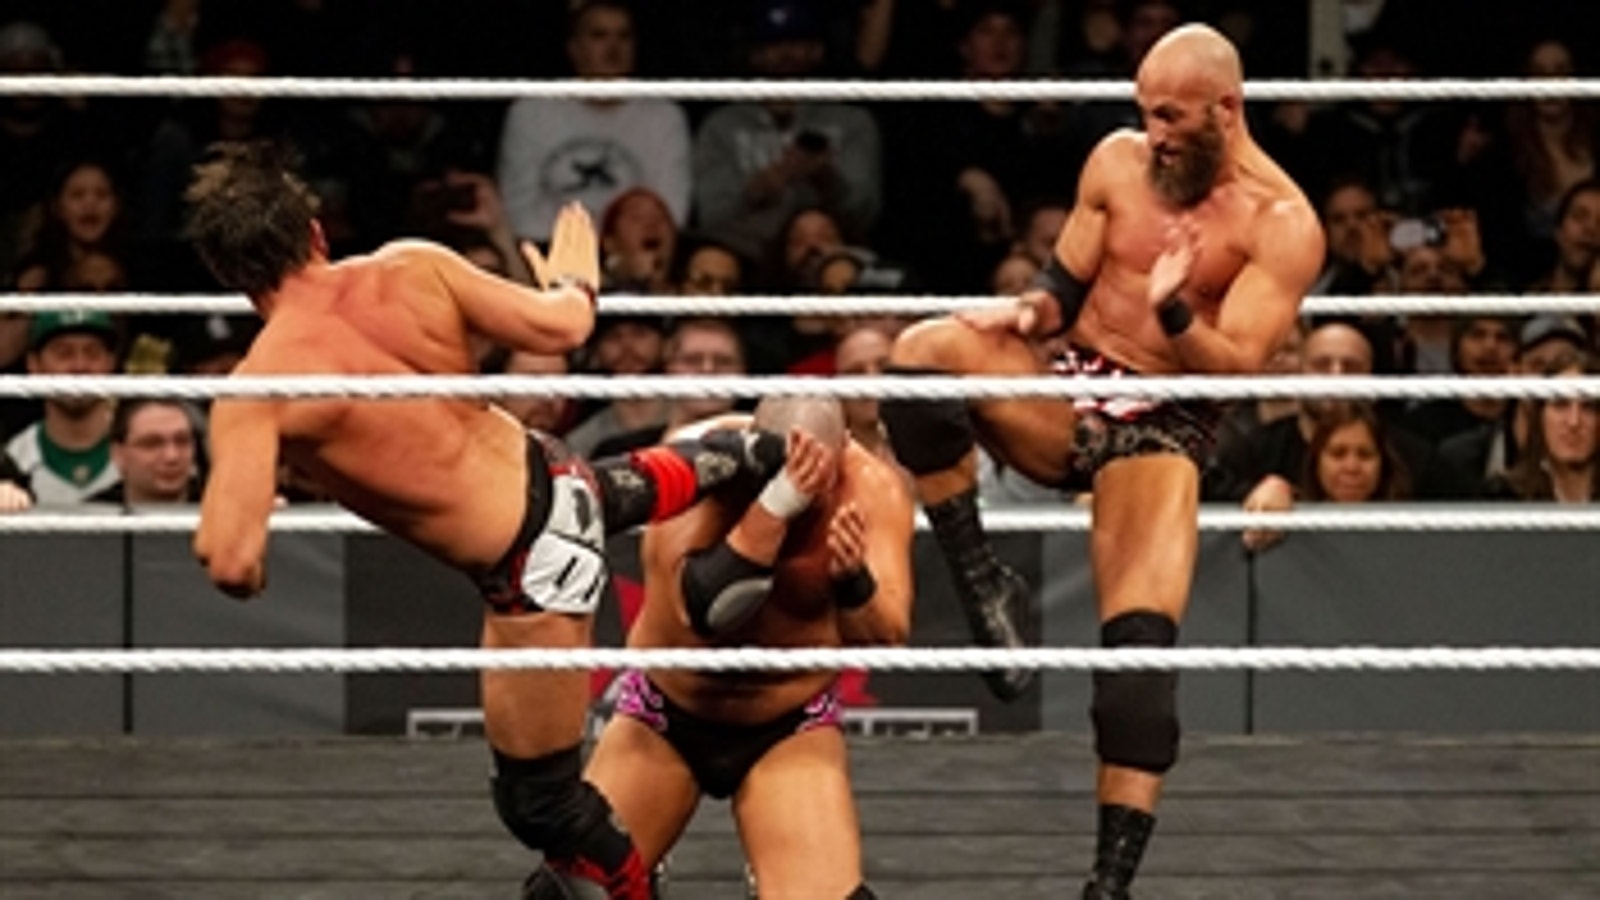 Relive the epic NXT tag team title 2-out-of-3 falls match between The Revival and DIY at NXT TakeOver: Toronto 2016 in its full-match glory.